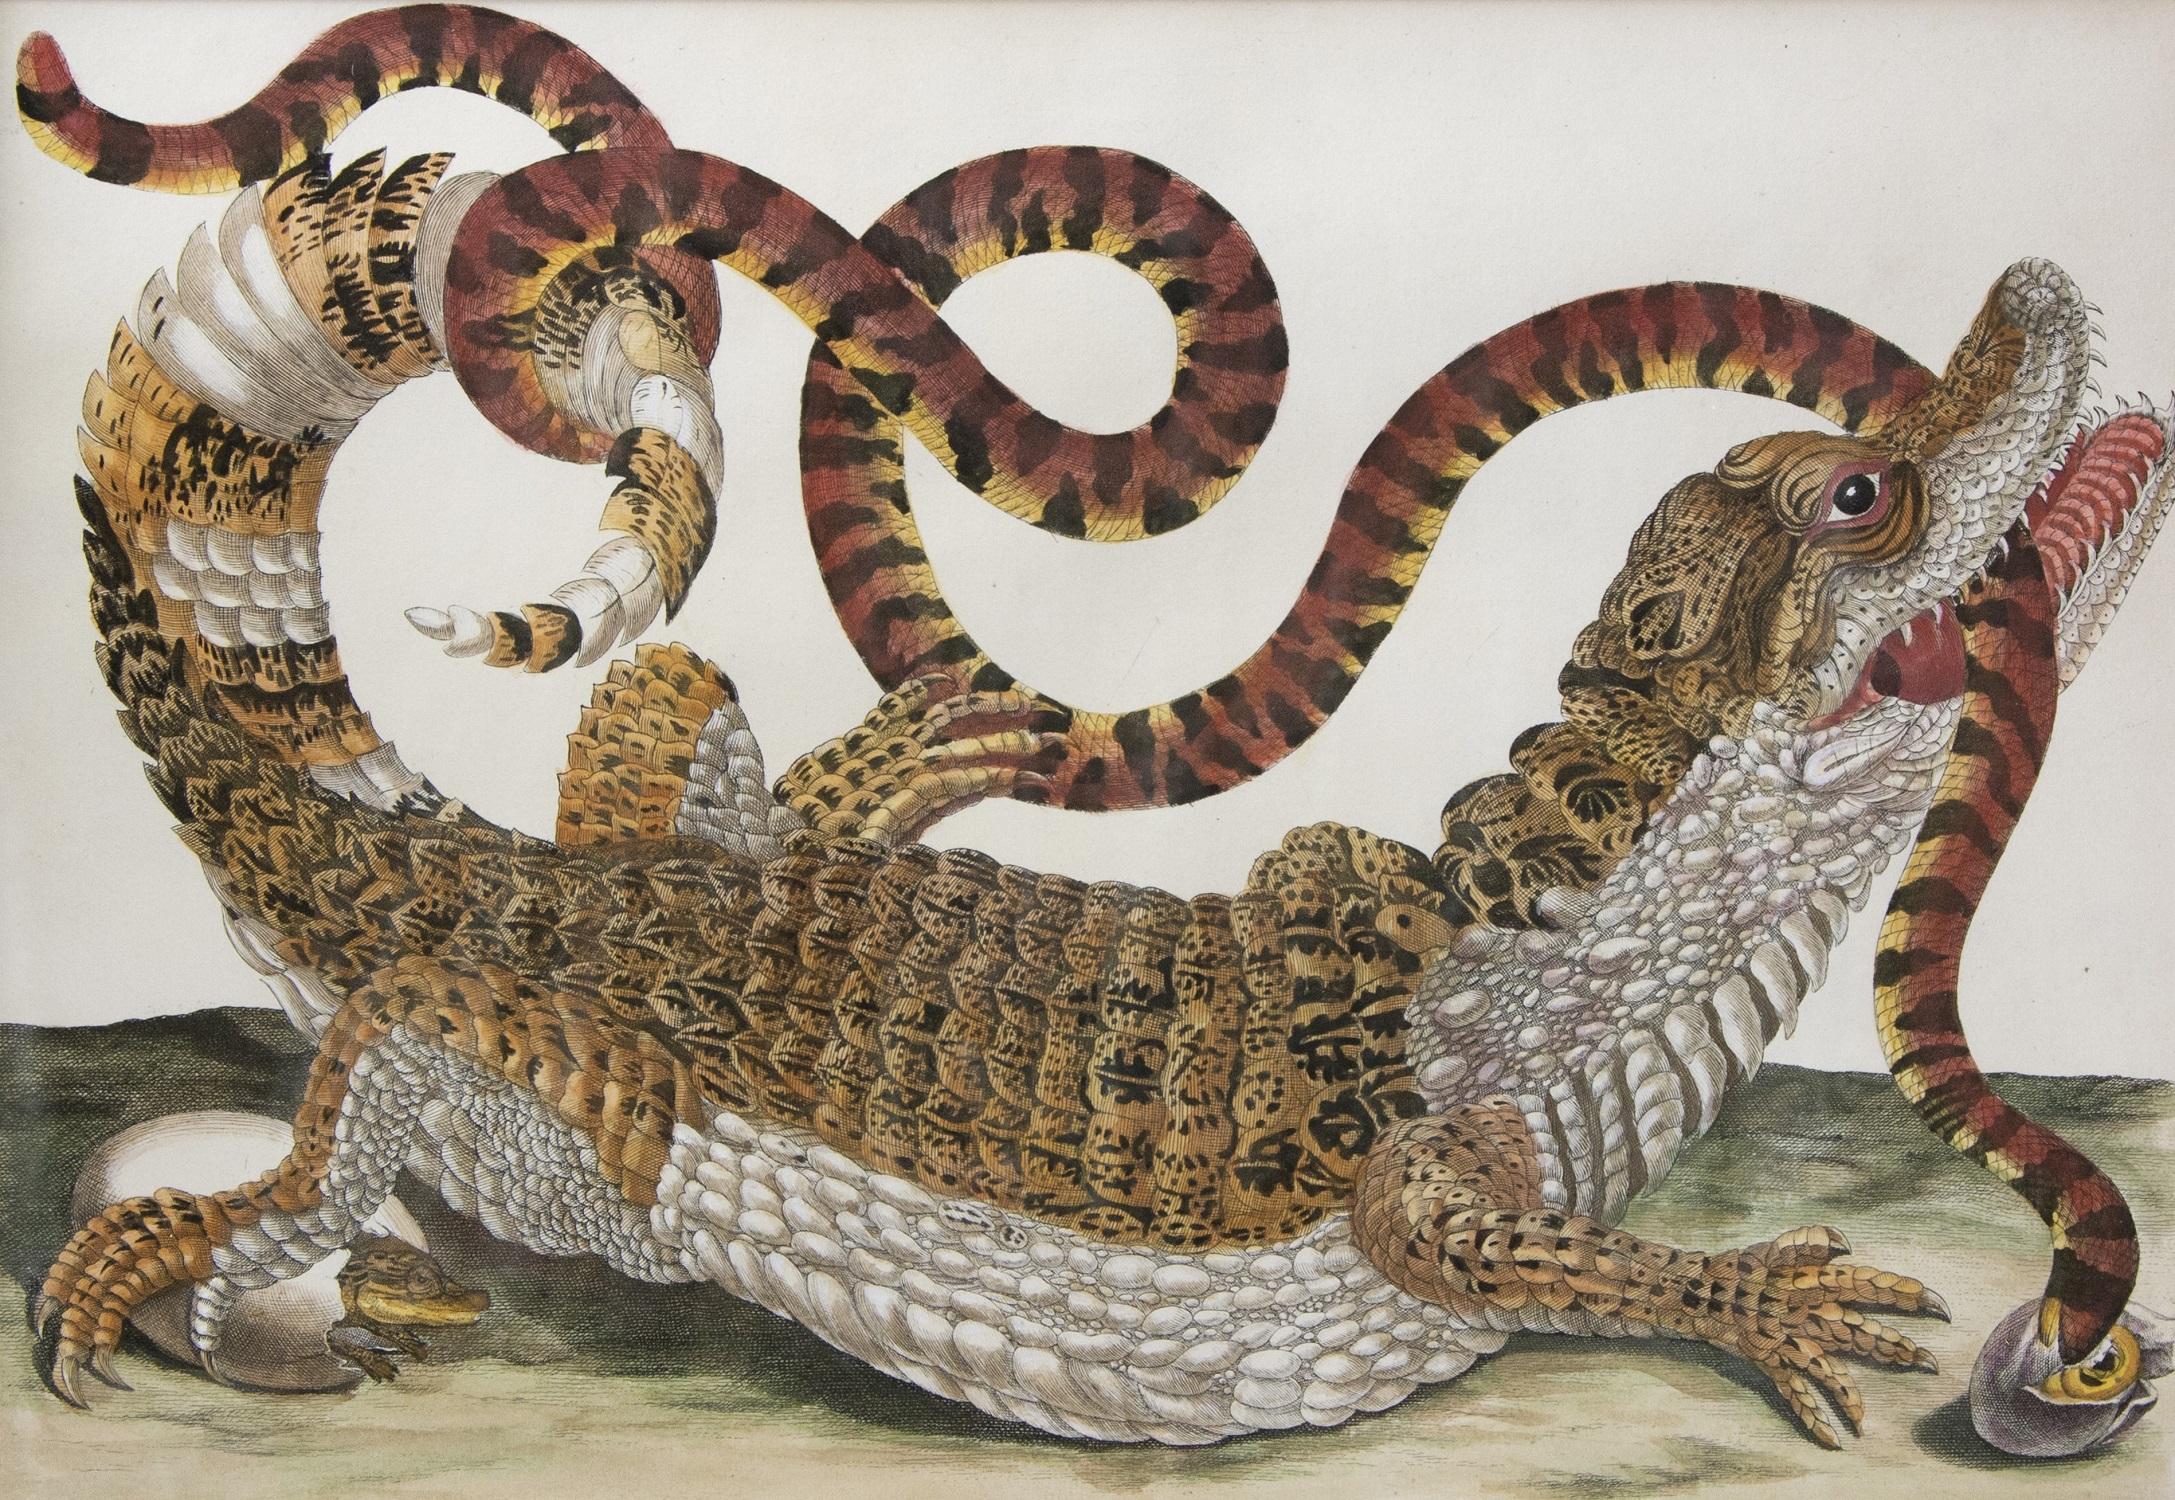 [MERIAN, Maria Sibylla; SLUYTER, P.] 
Alligator with Snake and a Lizard.  
The Hague, Gosse, 1719.

Engravings of an Alligator with a Snake and a Lizard by J. Mulder, P. Sluyter and D. Stoopendaal after Merian, with later hand-colour, from